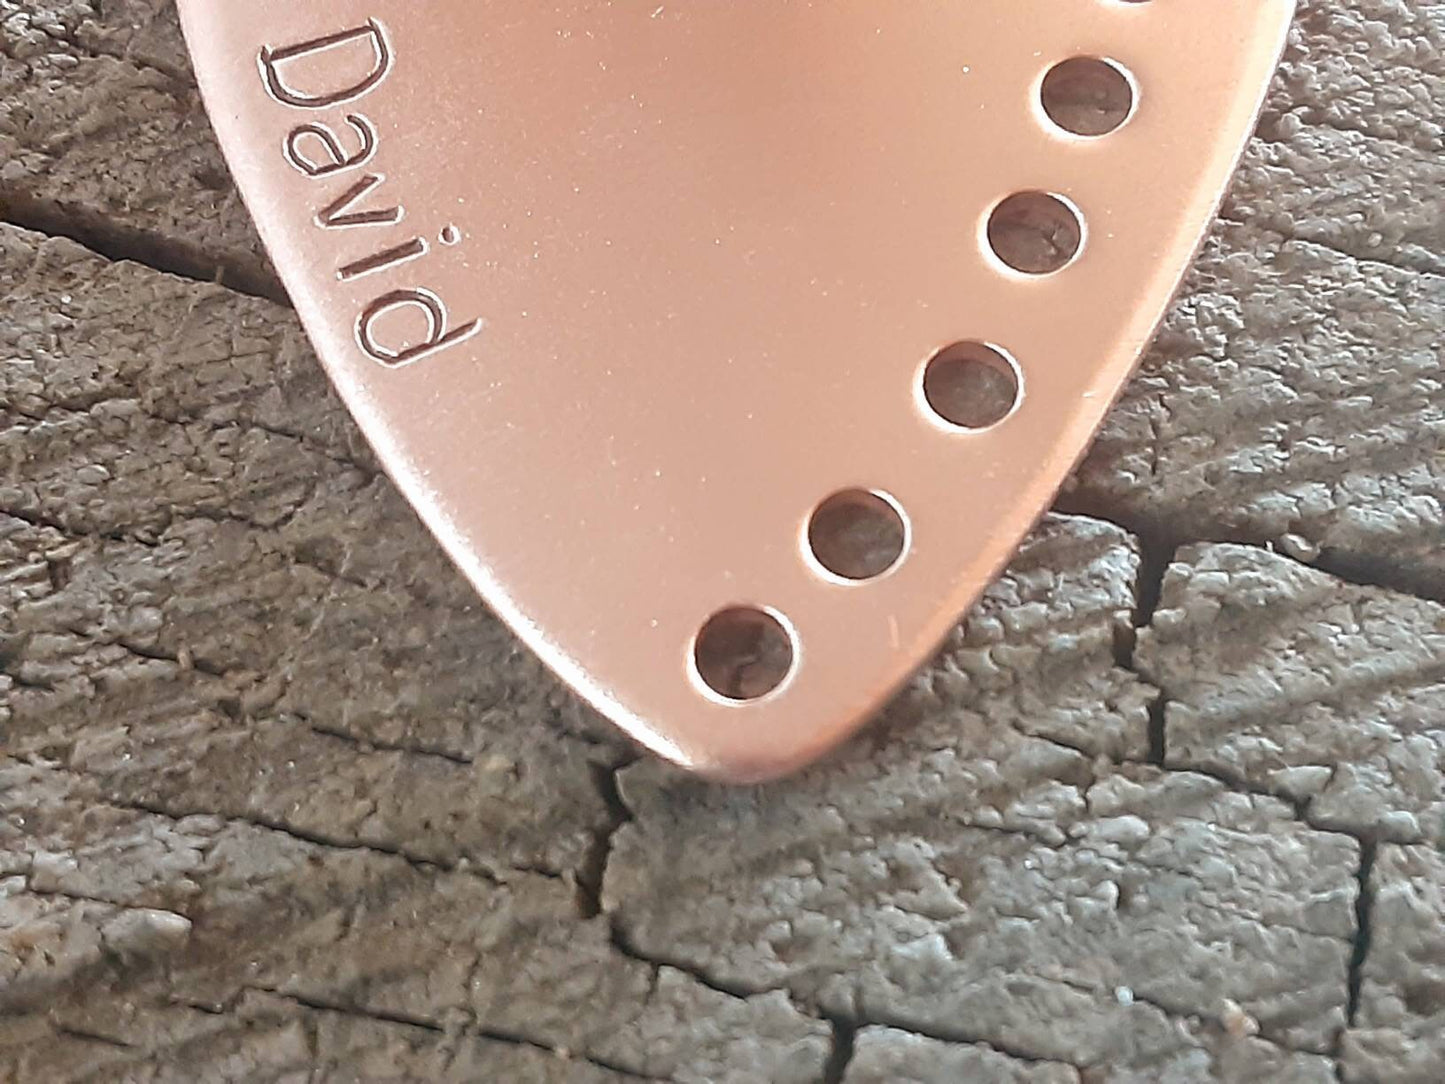 Custom copper guitar pick with holes along the edge and your name